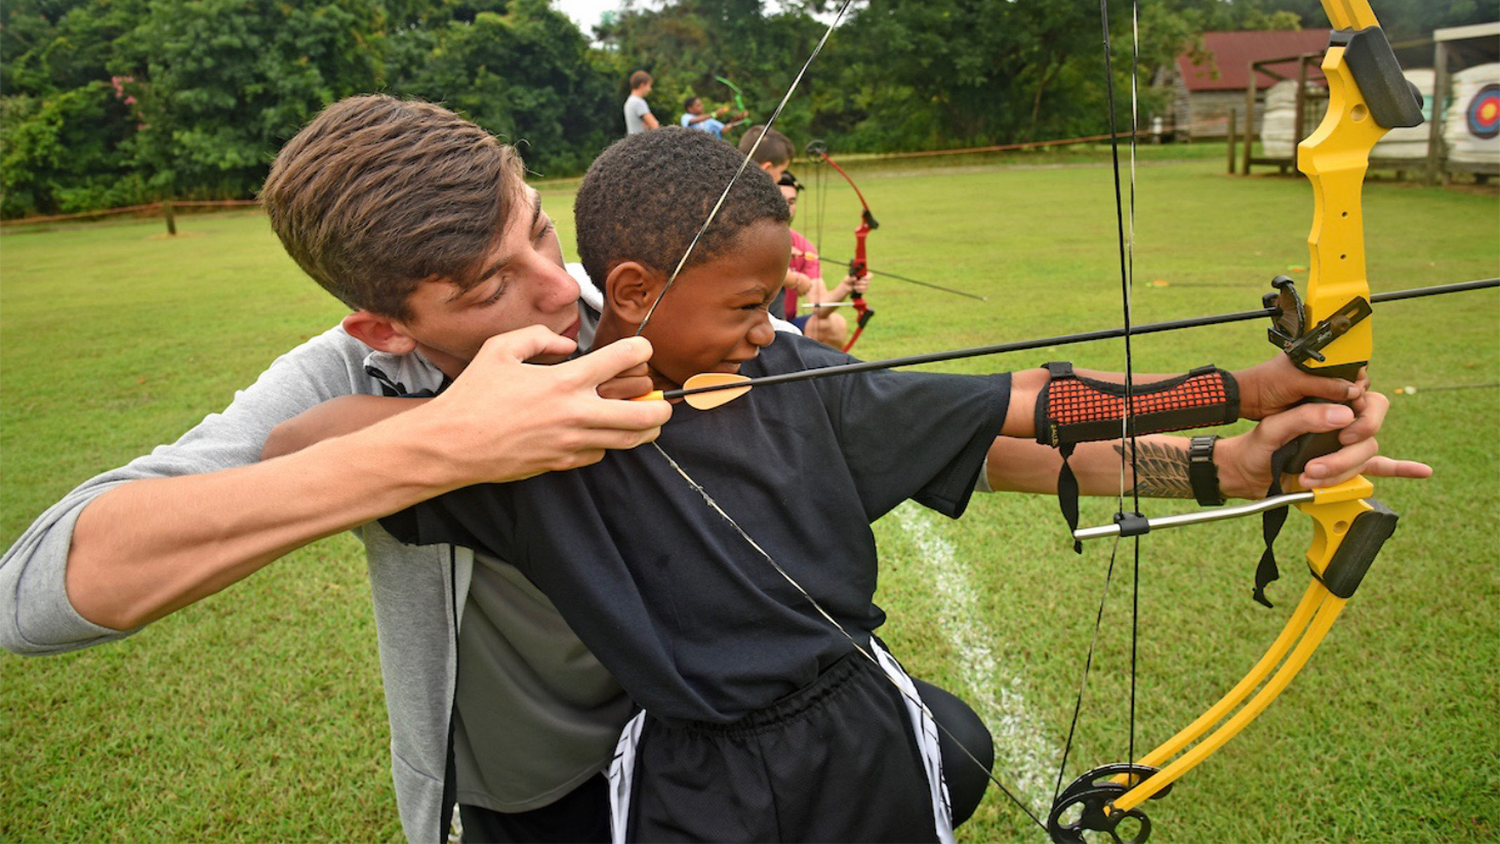 Young Caucasian male helping young African American boy with archery